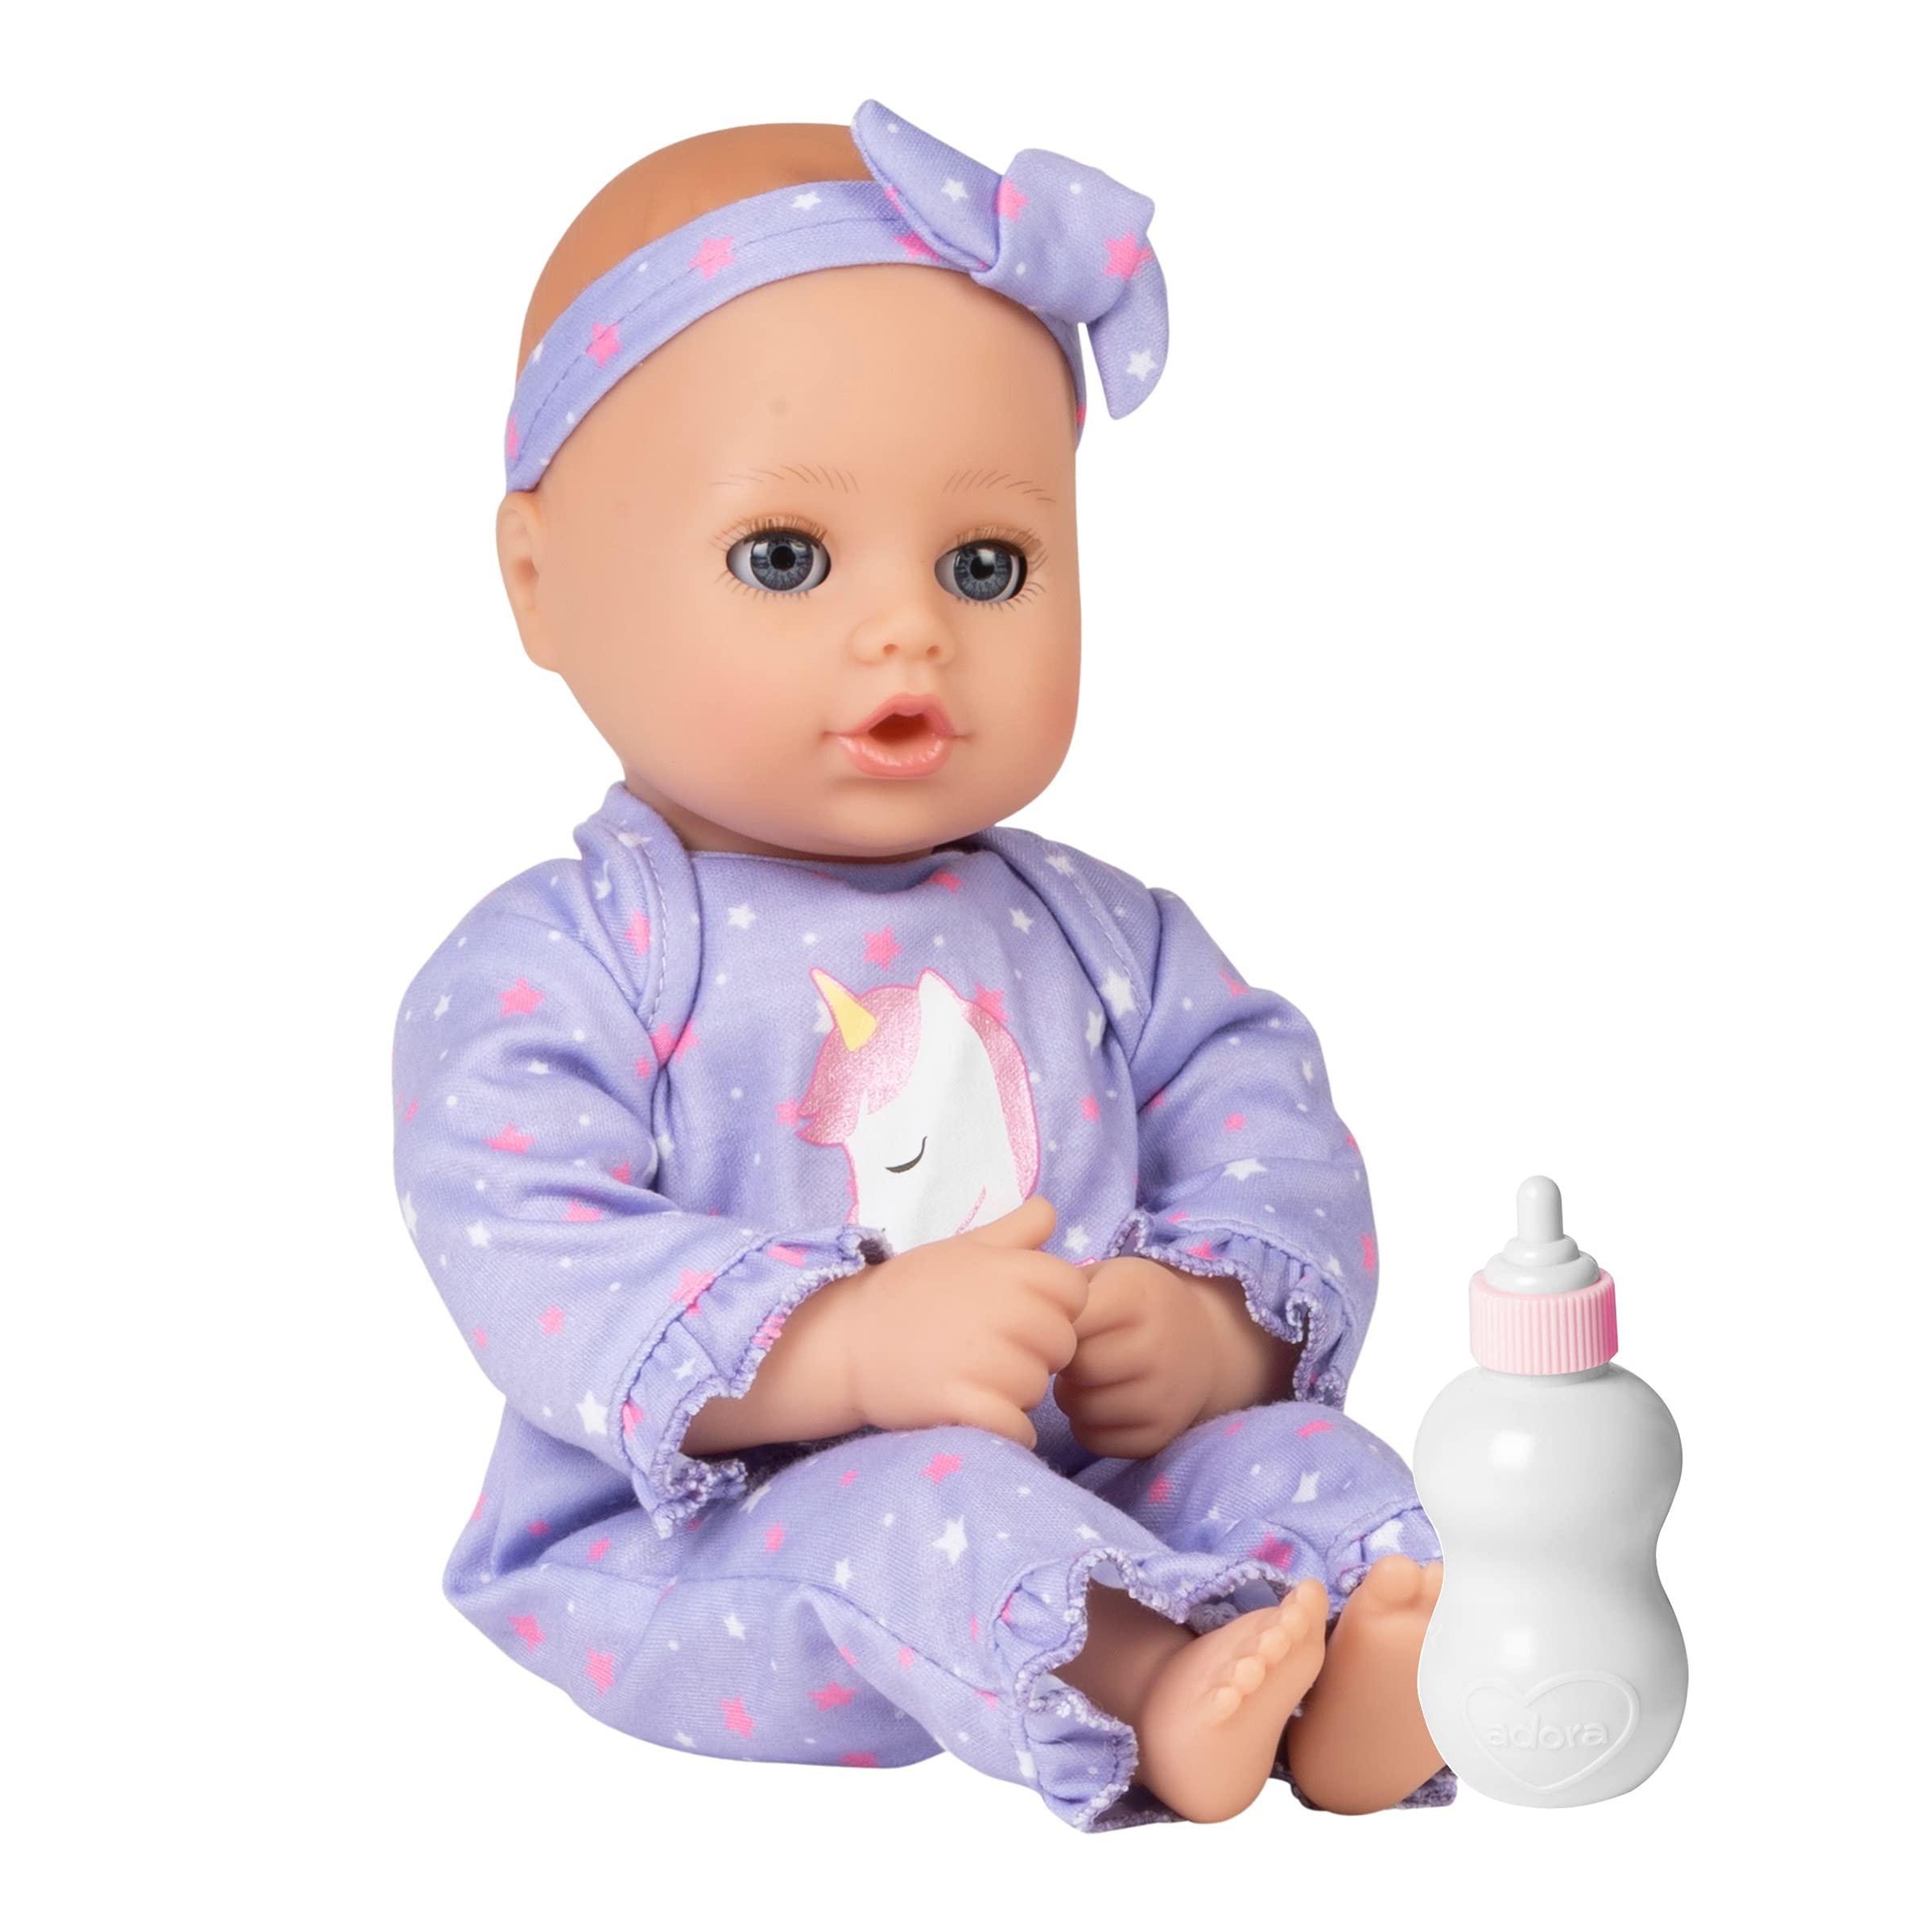 Adora Playtime Baby Doll Unicorn Glitter, 13 inch Soft Doll, Open/Close Eyes, Best Baby Girl Gift for Age 1+